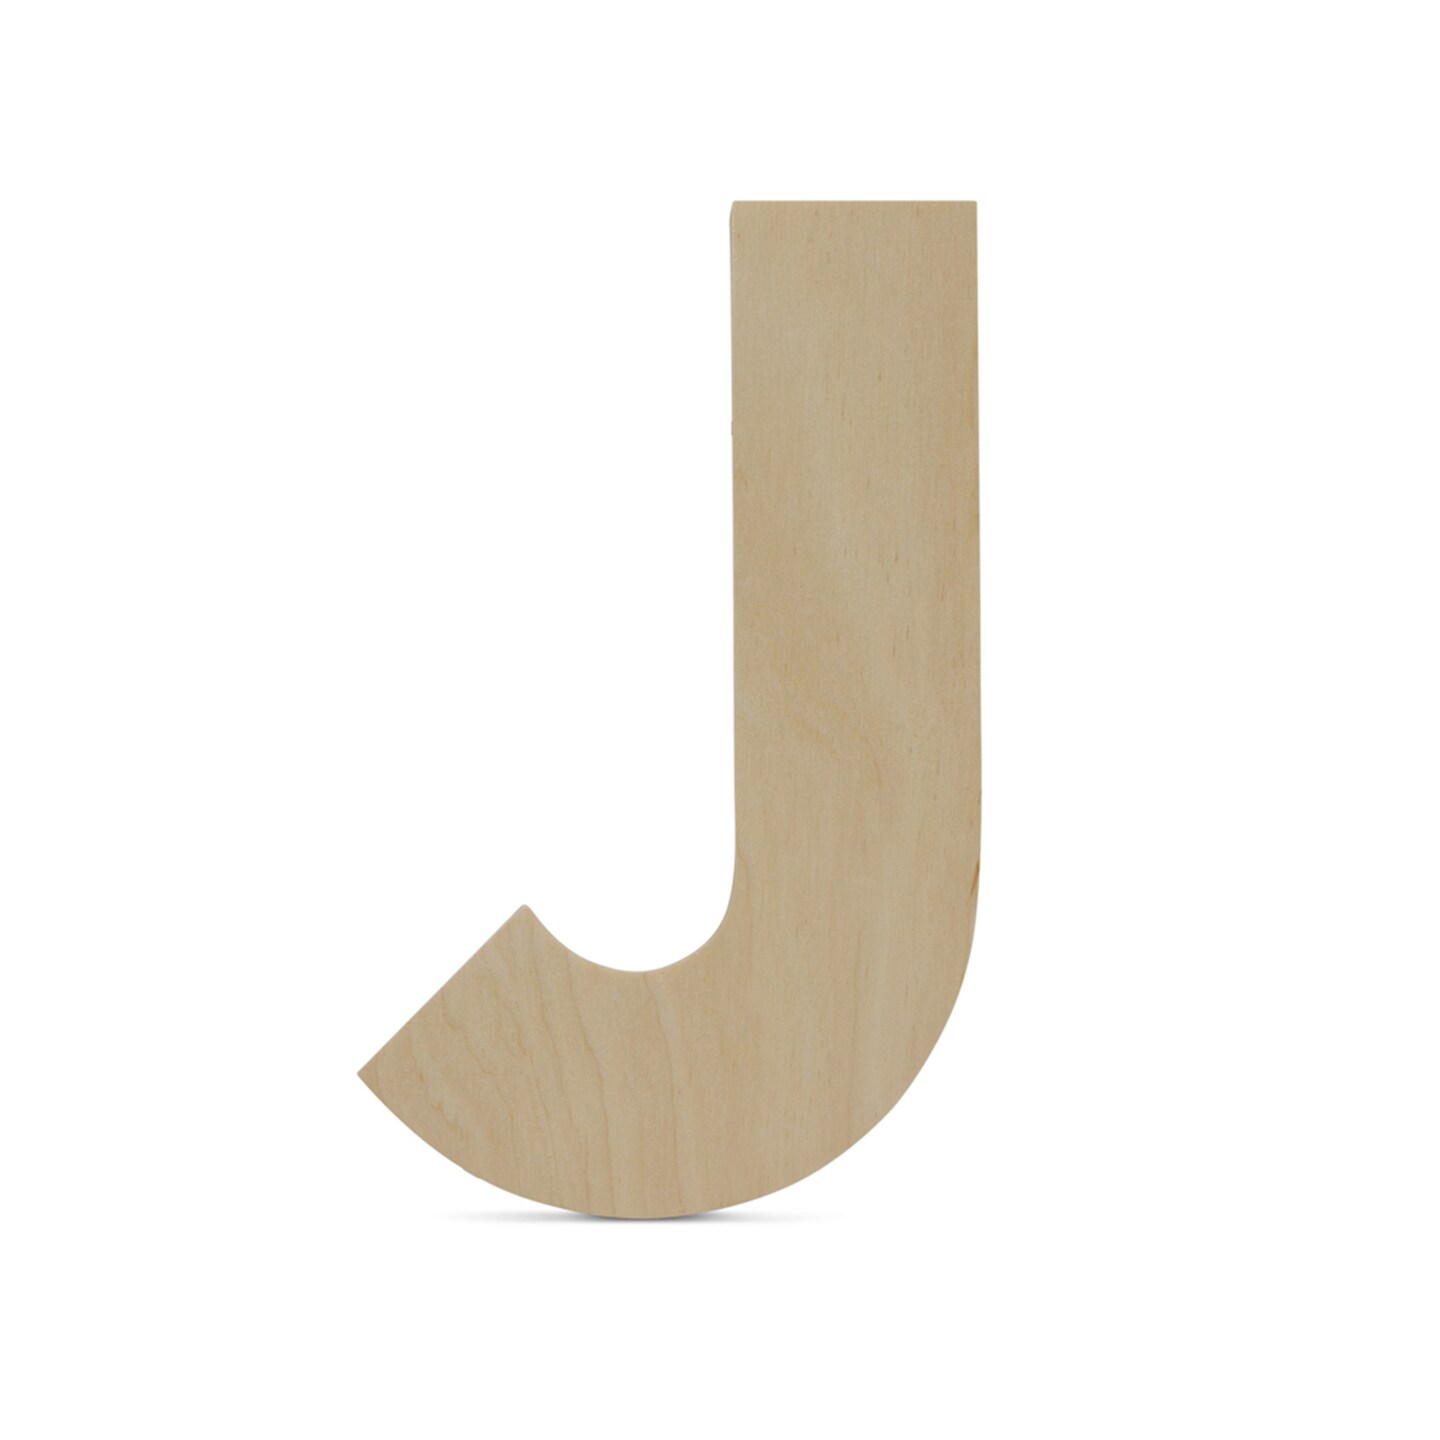 Wooden Letter J 12 inch or 8 inch, Unfinished Large Wood Letters for Crafts | Woodpeckers